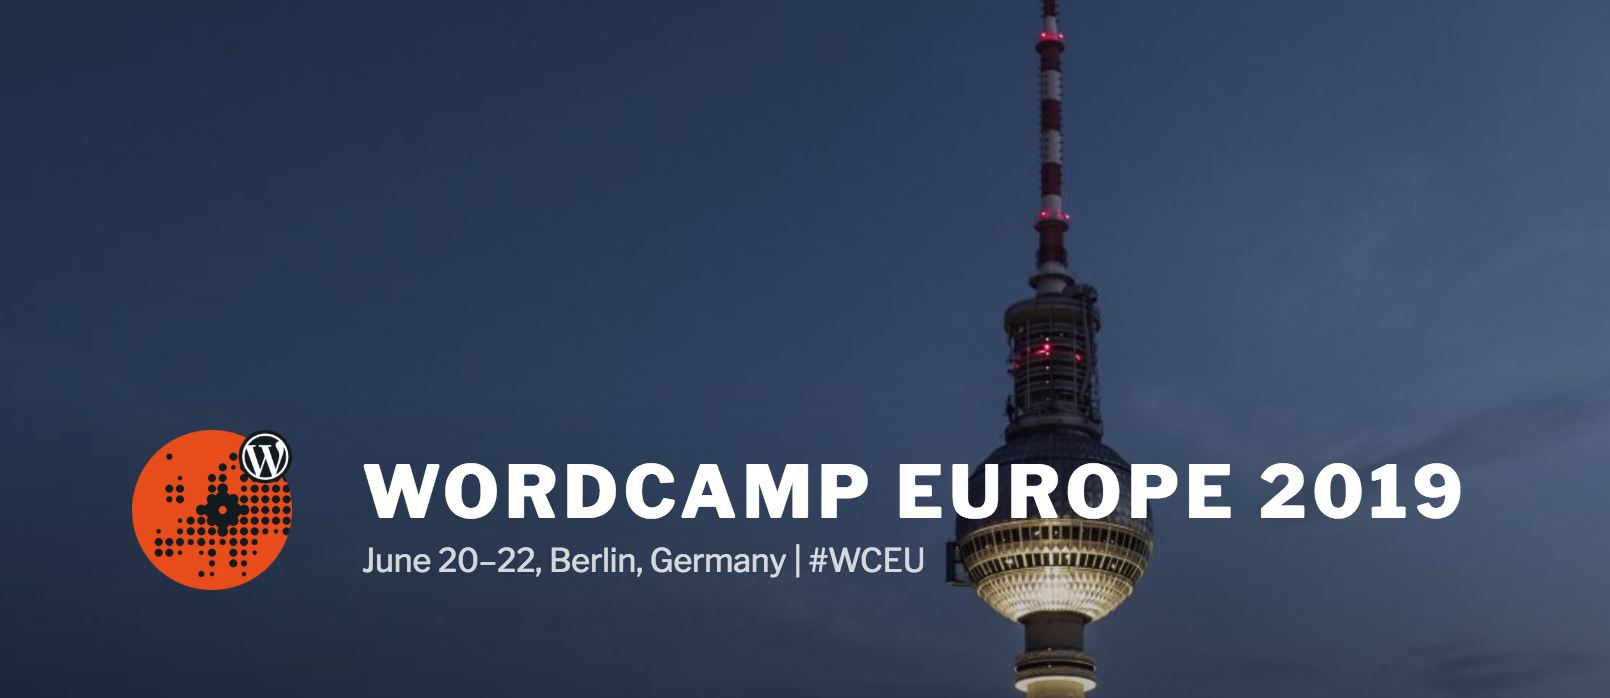 First Wave of WordCamp Europe 2019 Tickets Sells Out in 3 Hours